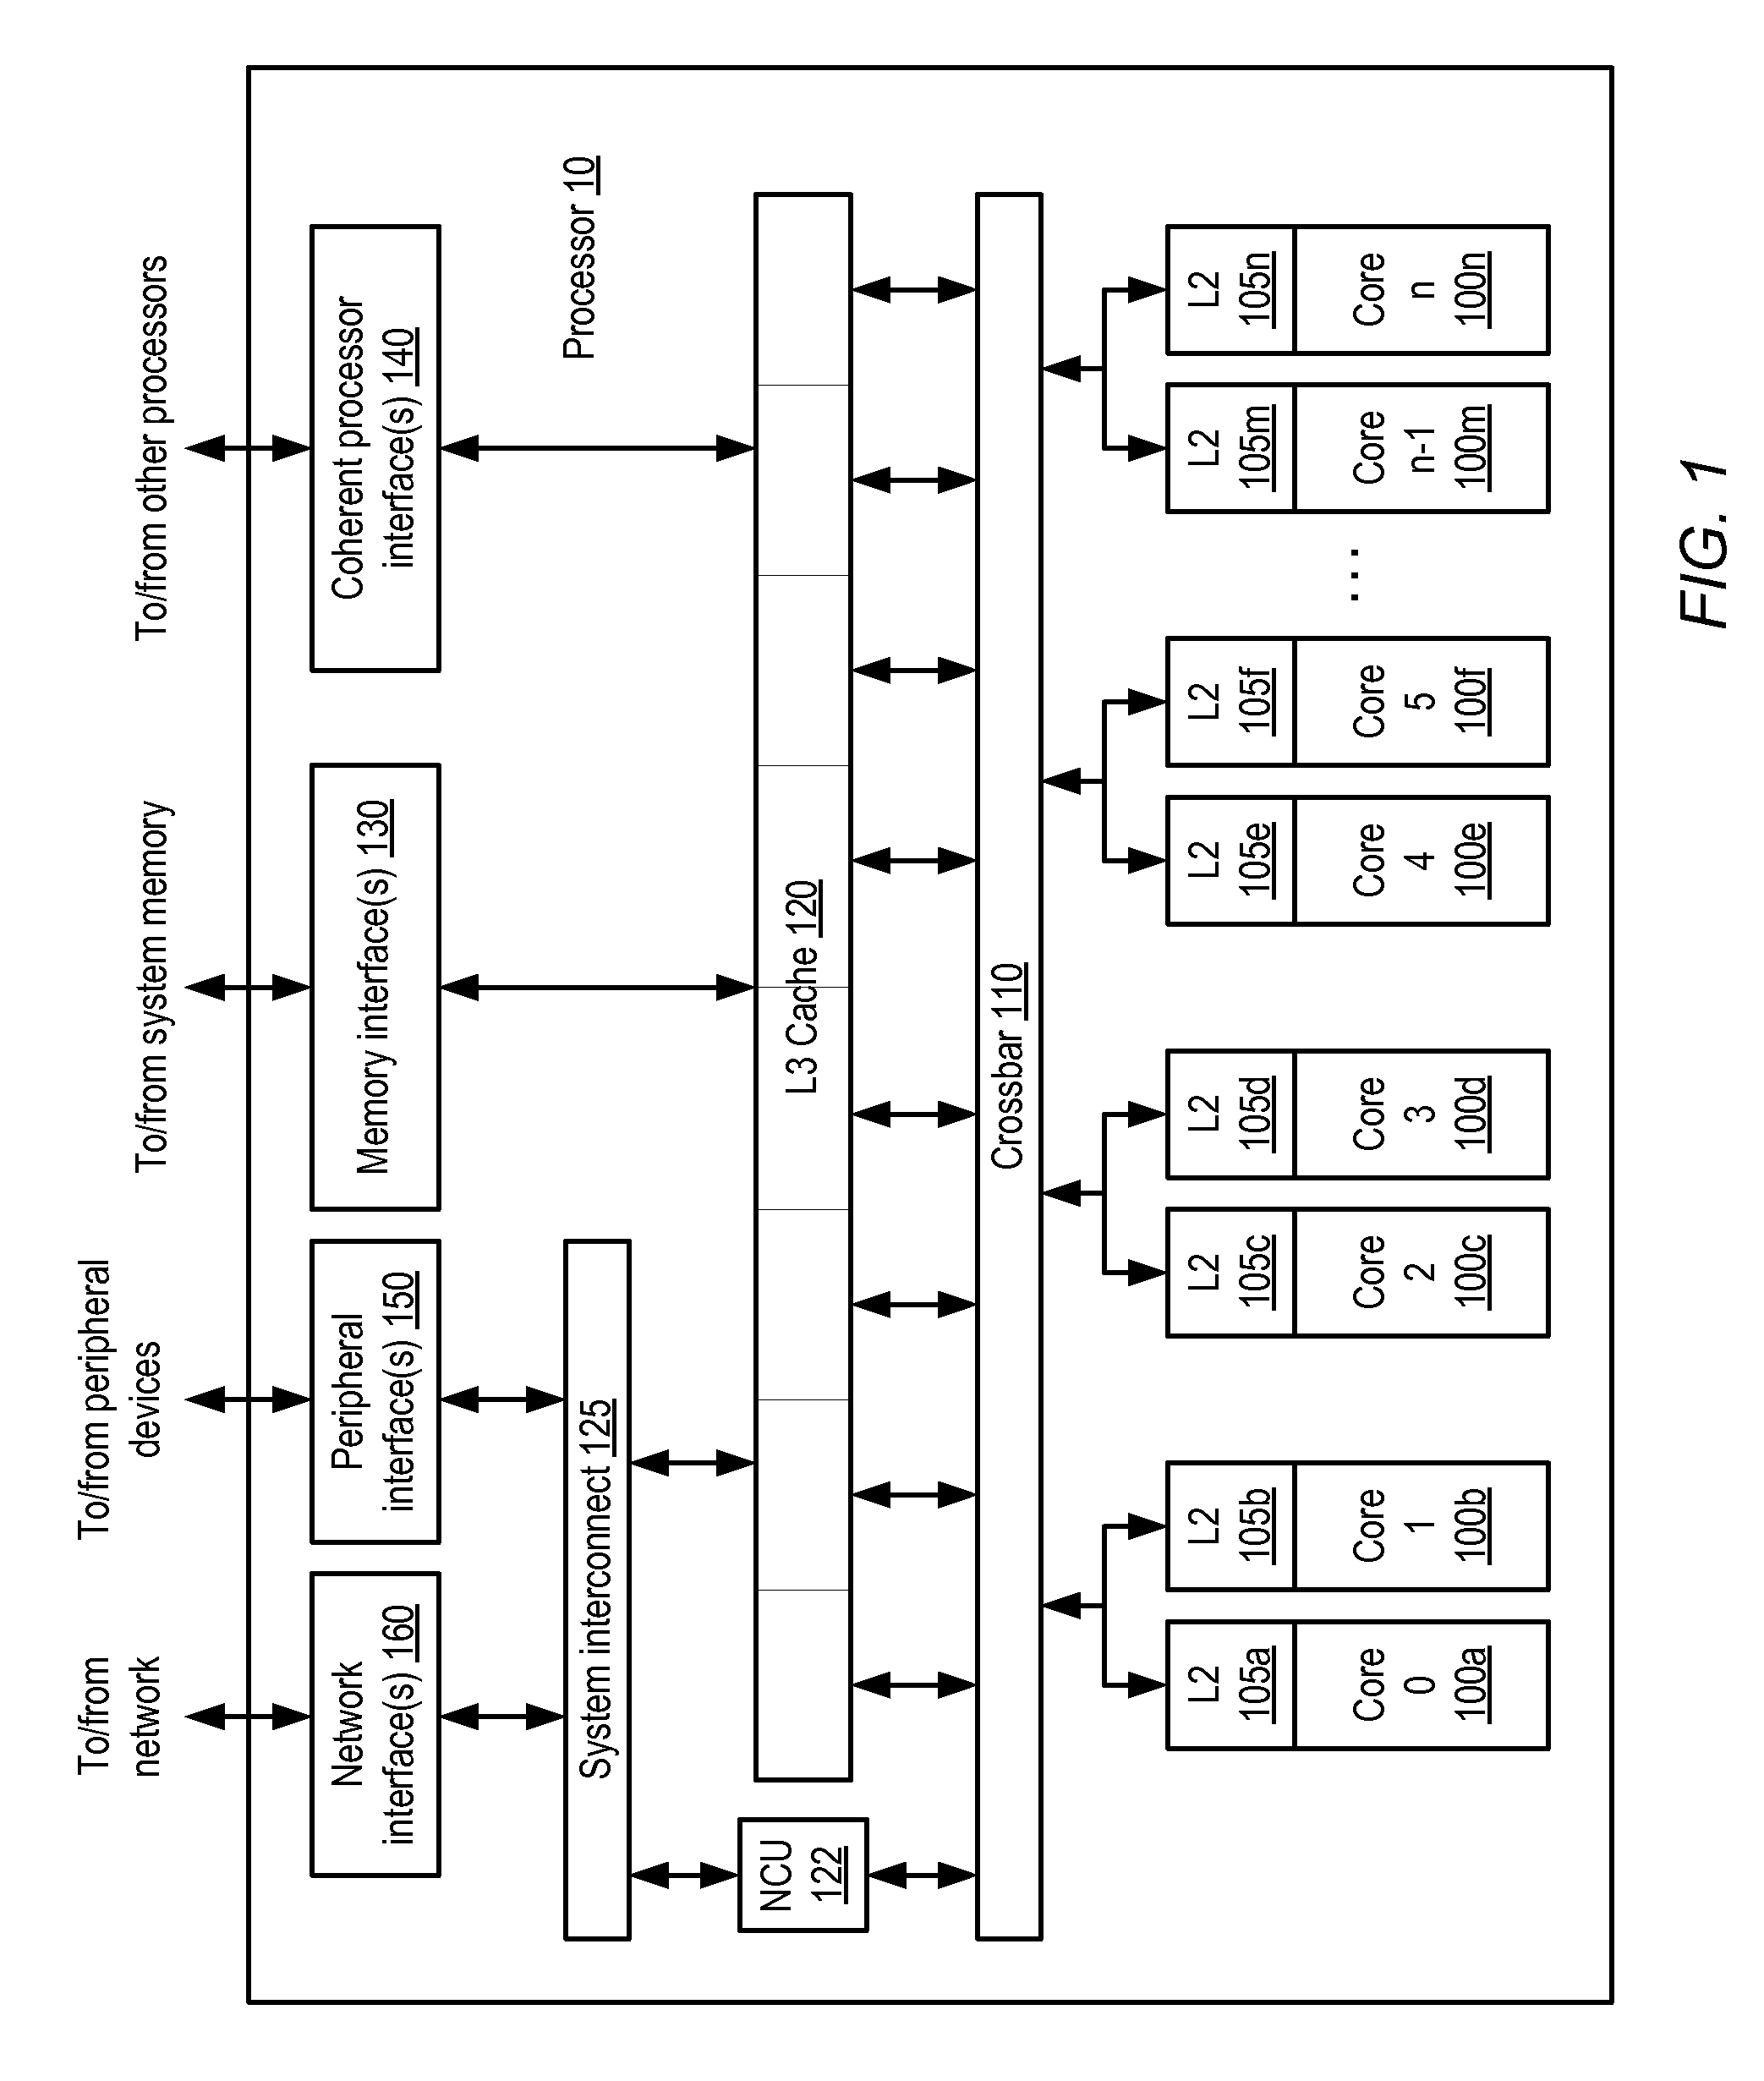 Perceptron-based branch prediction mechanism for predicting conditional branch instructions on a multithreaded processor